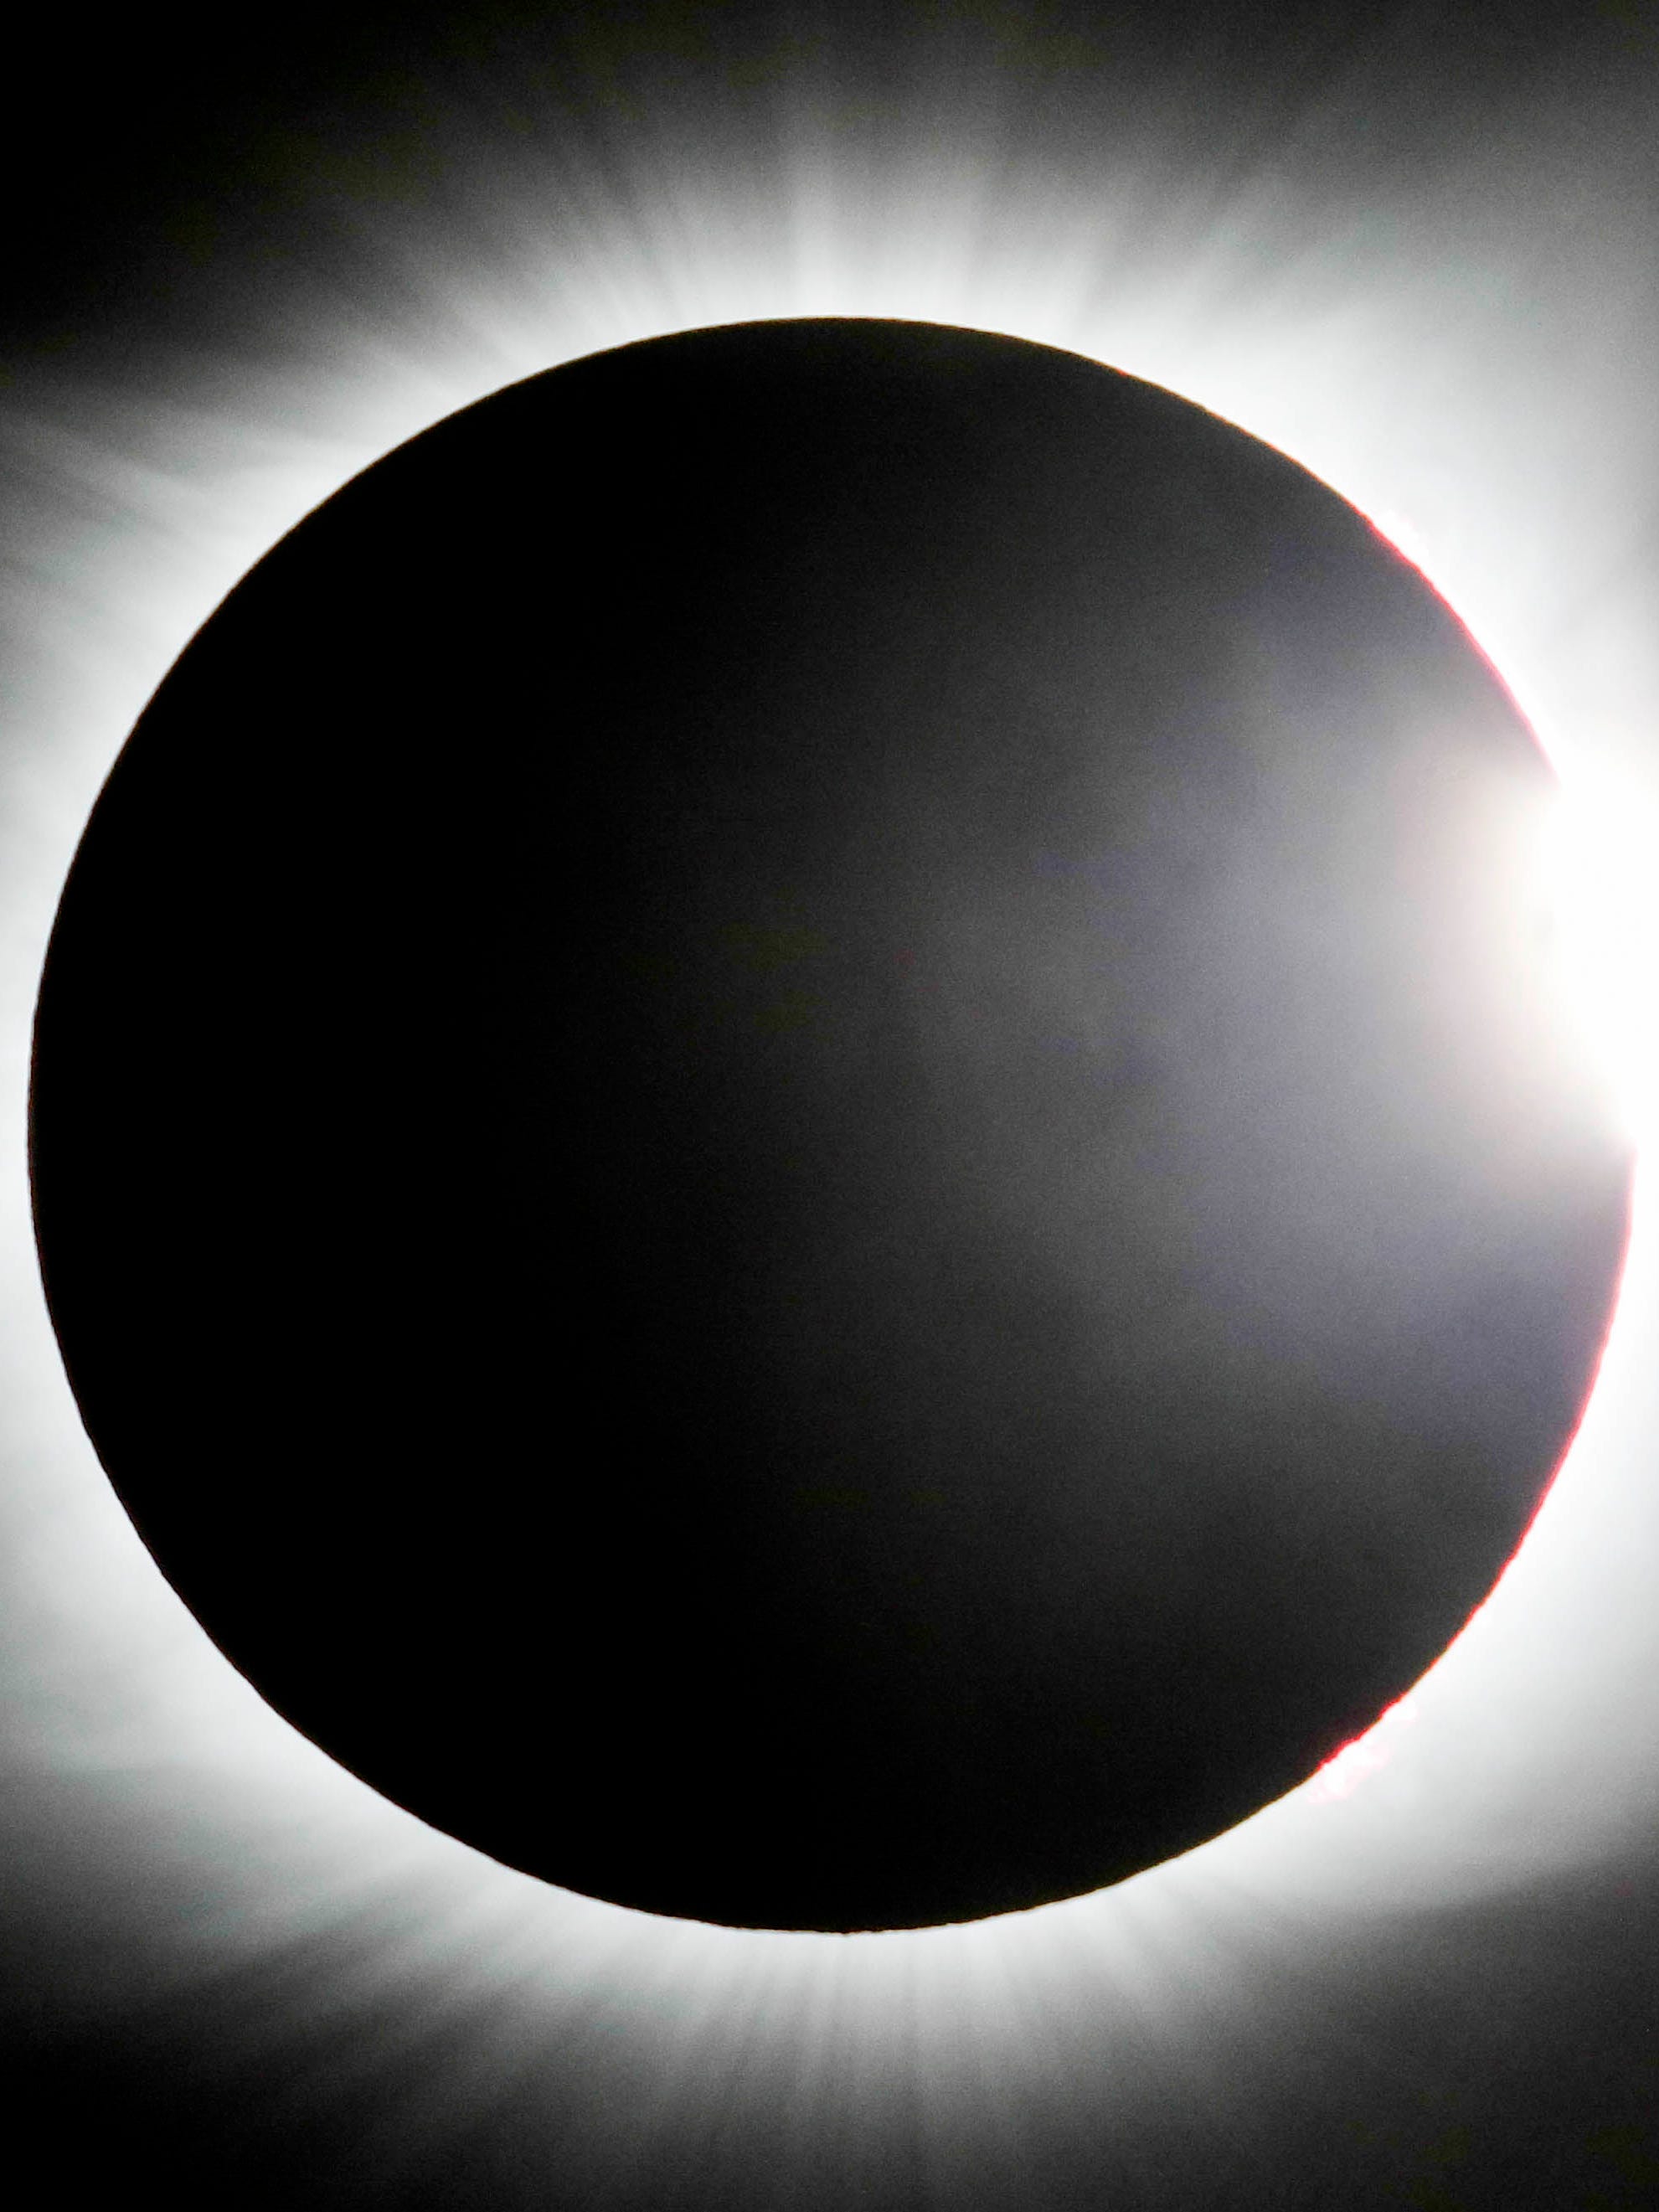 A total solar eclipse will occur April 2024. Here's what to know